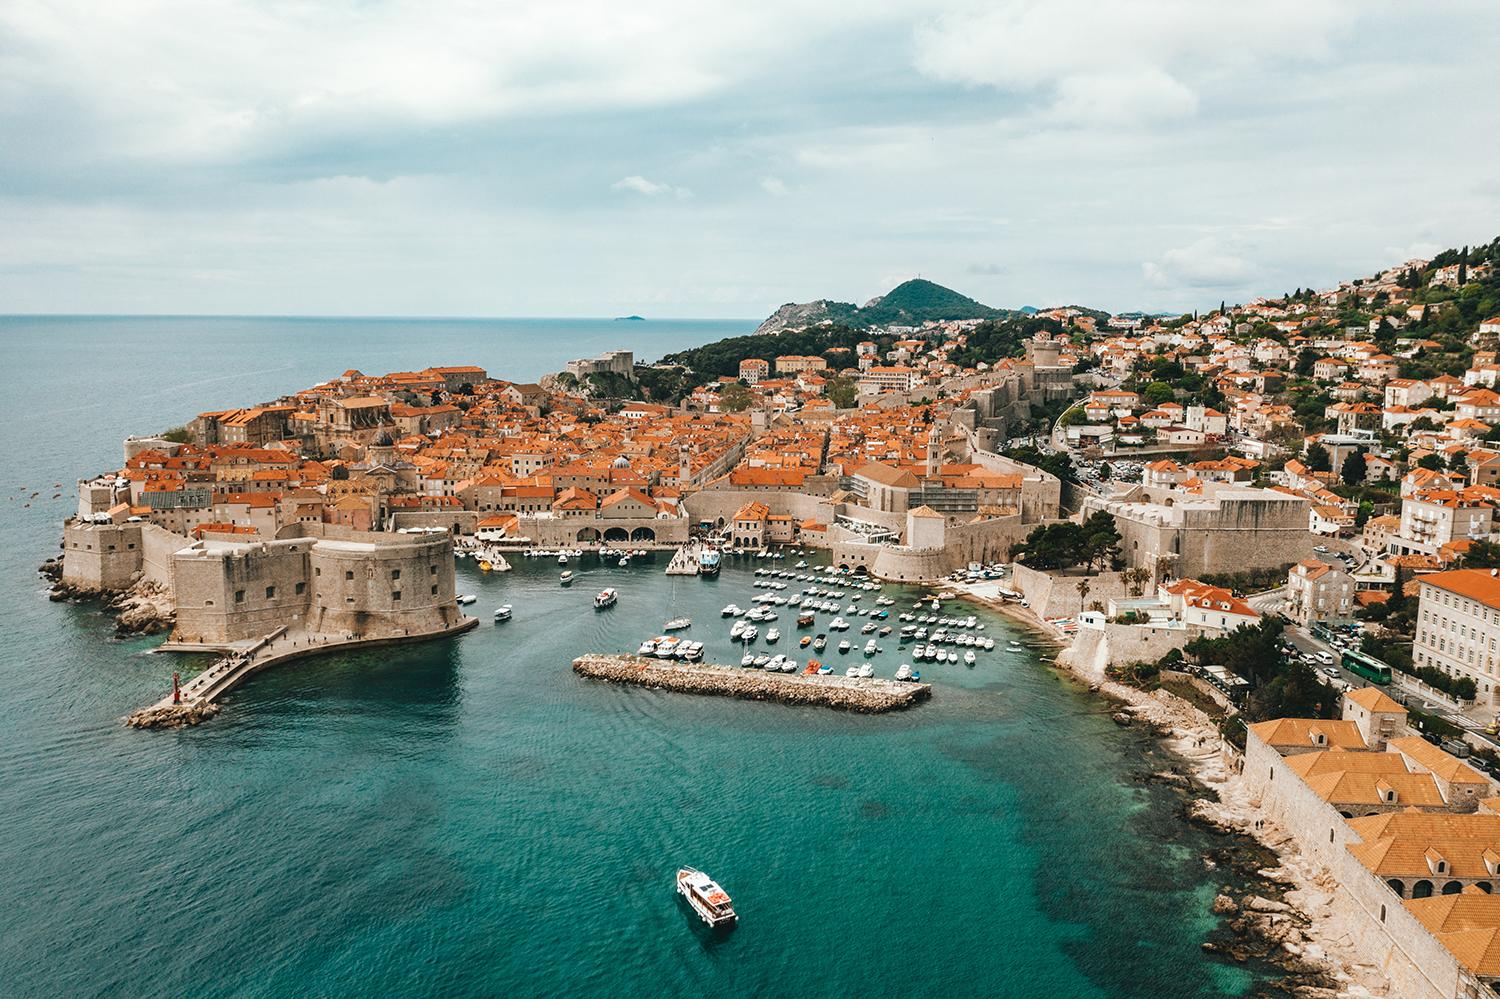 Visiting Dubrovnik: Welcome to the most famous town of the Croatian Adriatic sea